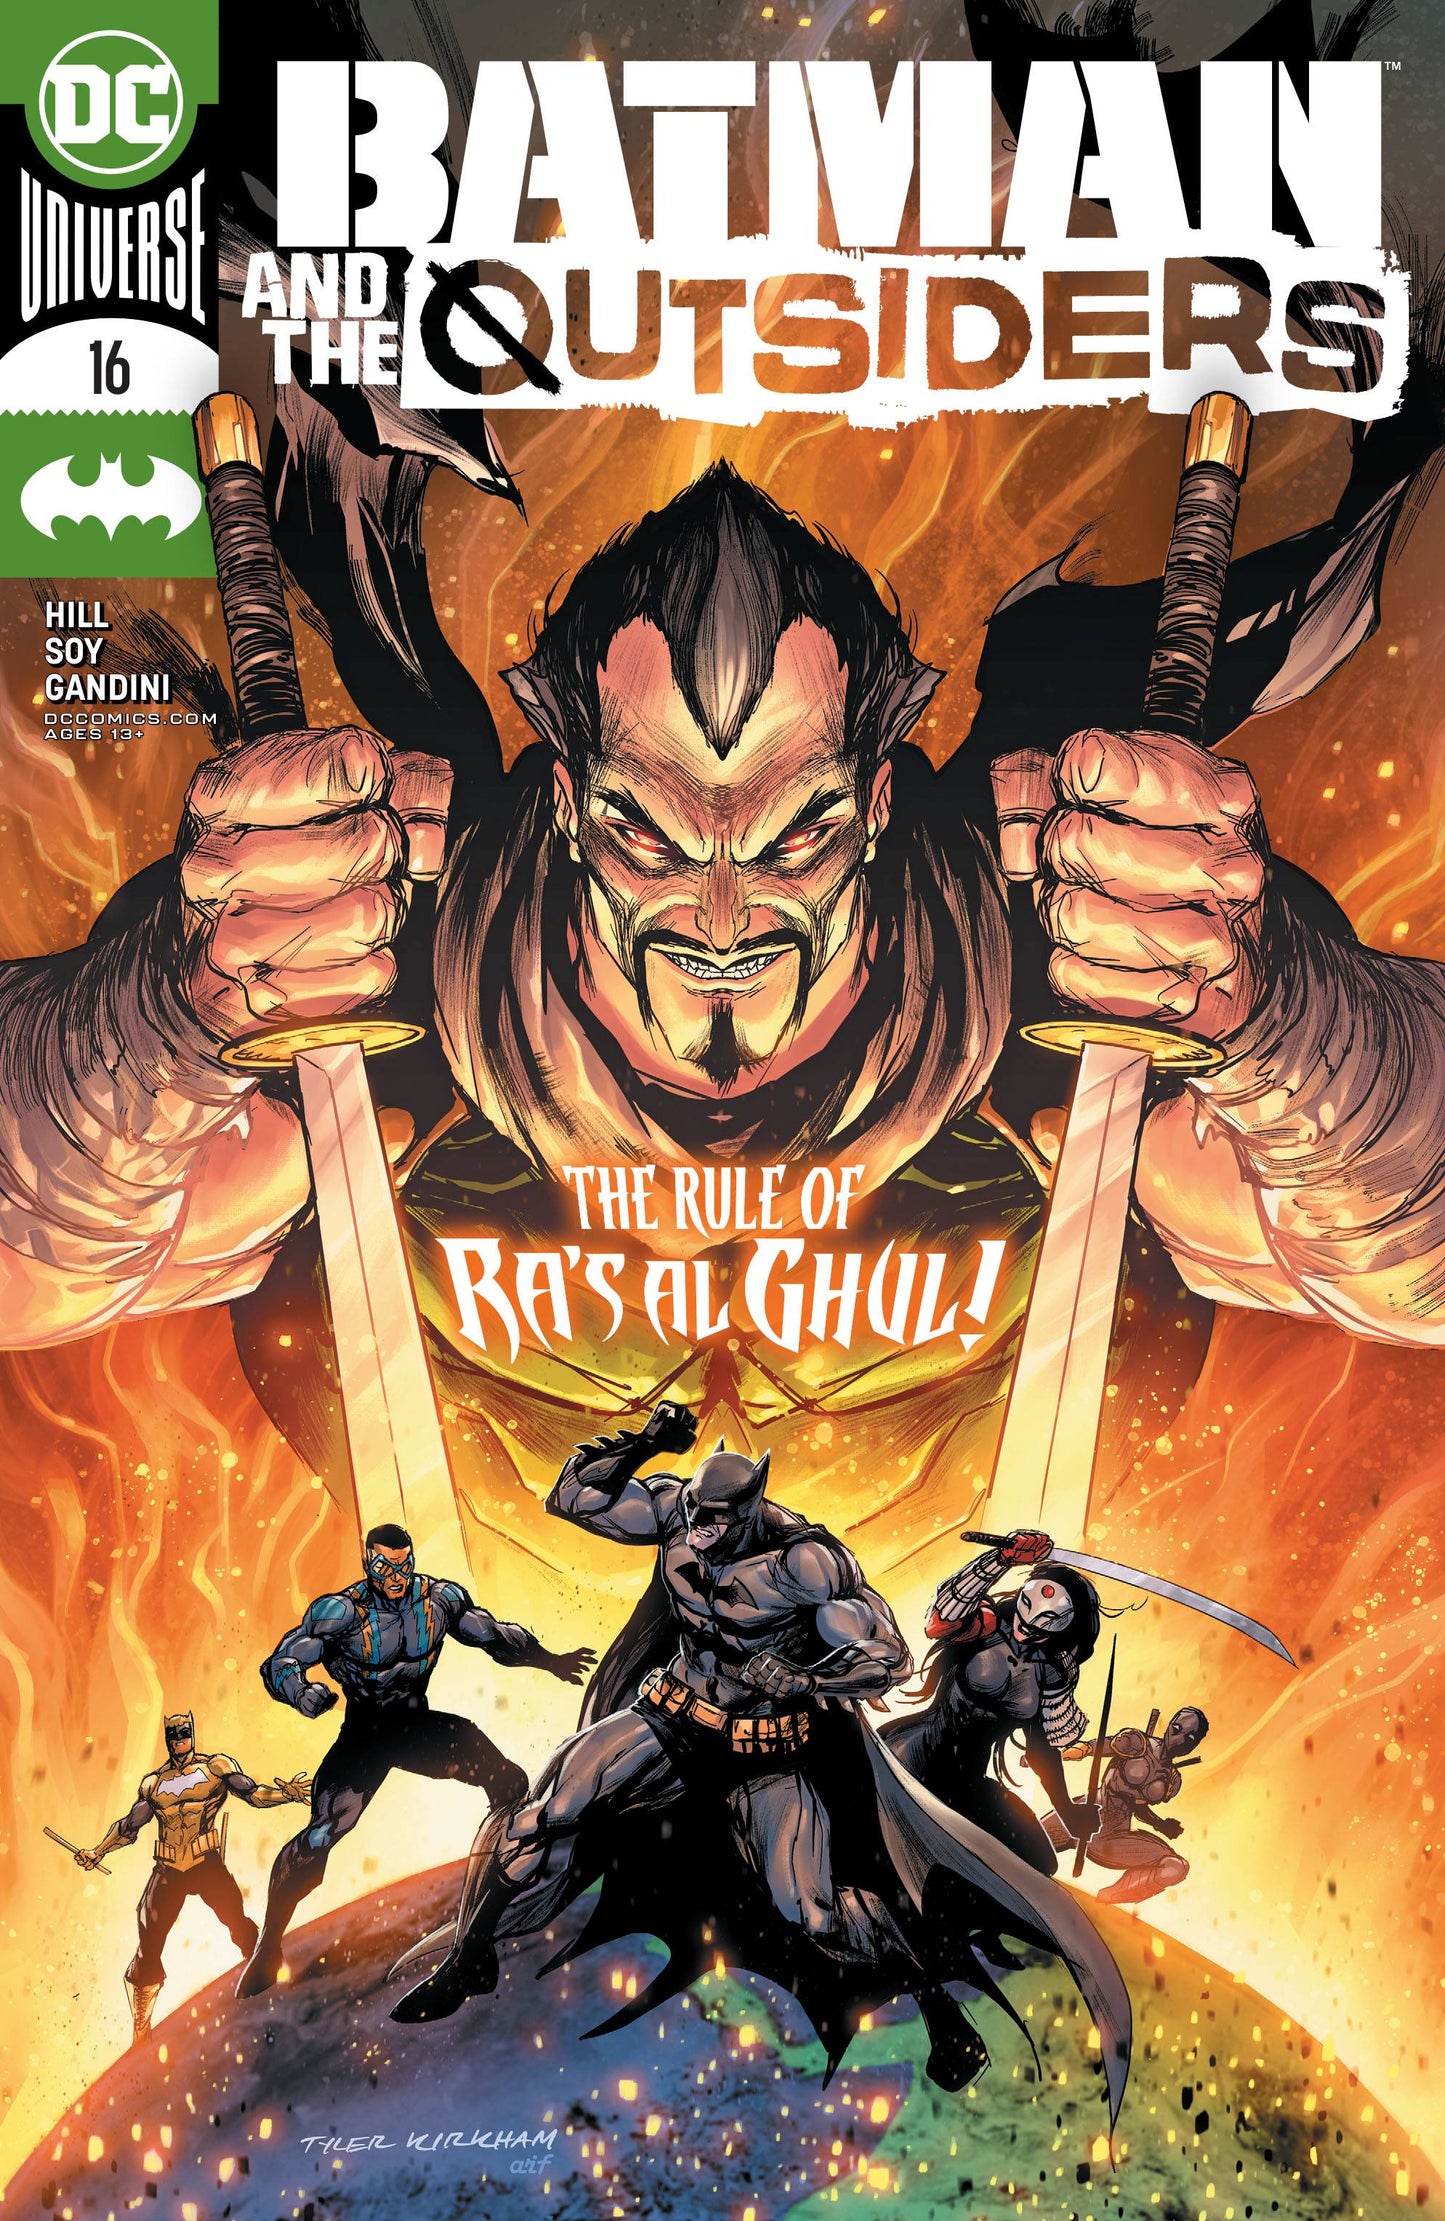 BATMAN AND THE OUTSIDERS #16